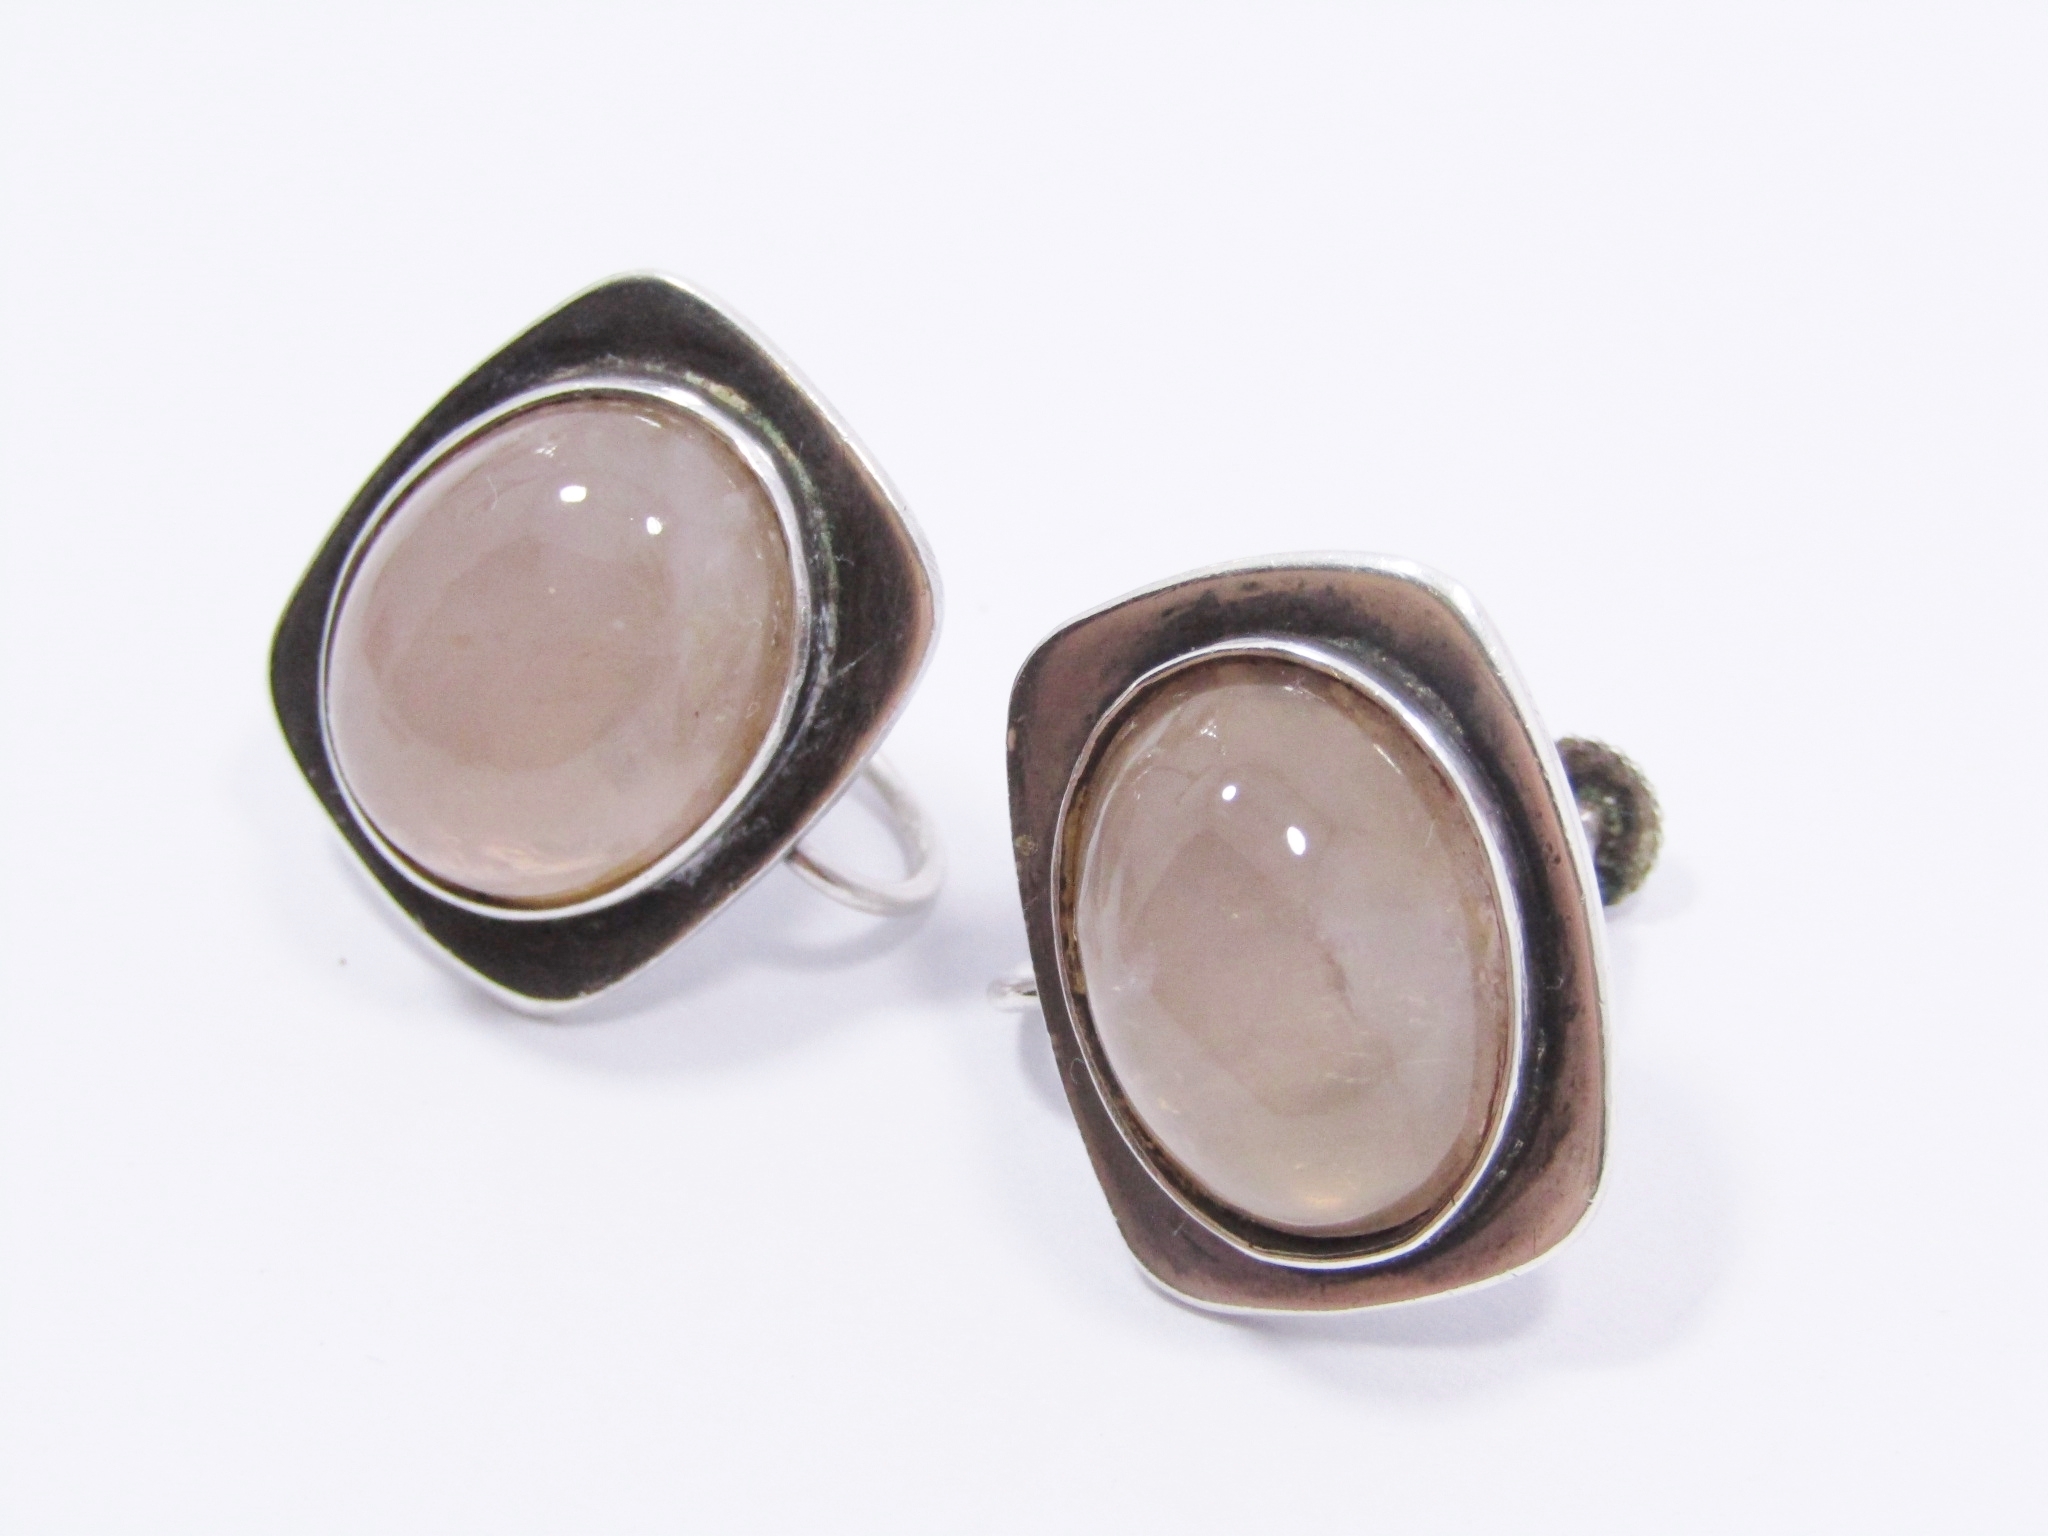 A Gorgeous Pair of Sterling Silver Screw Back Rose quartz Earrings